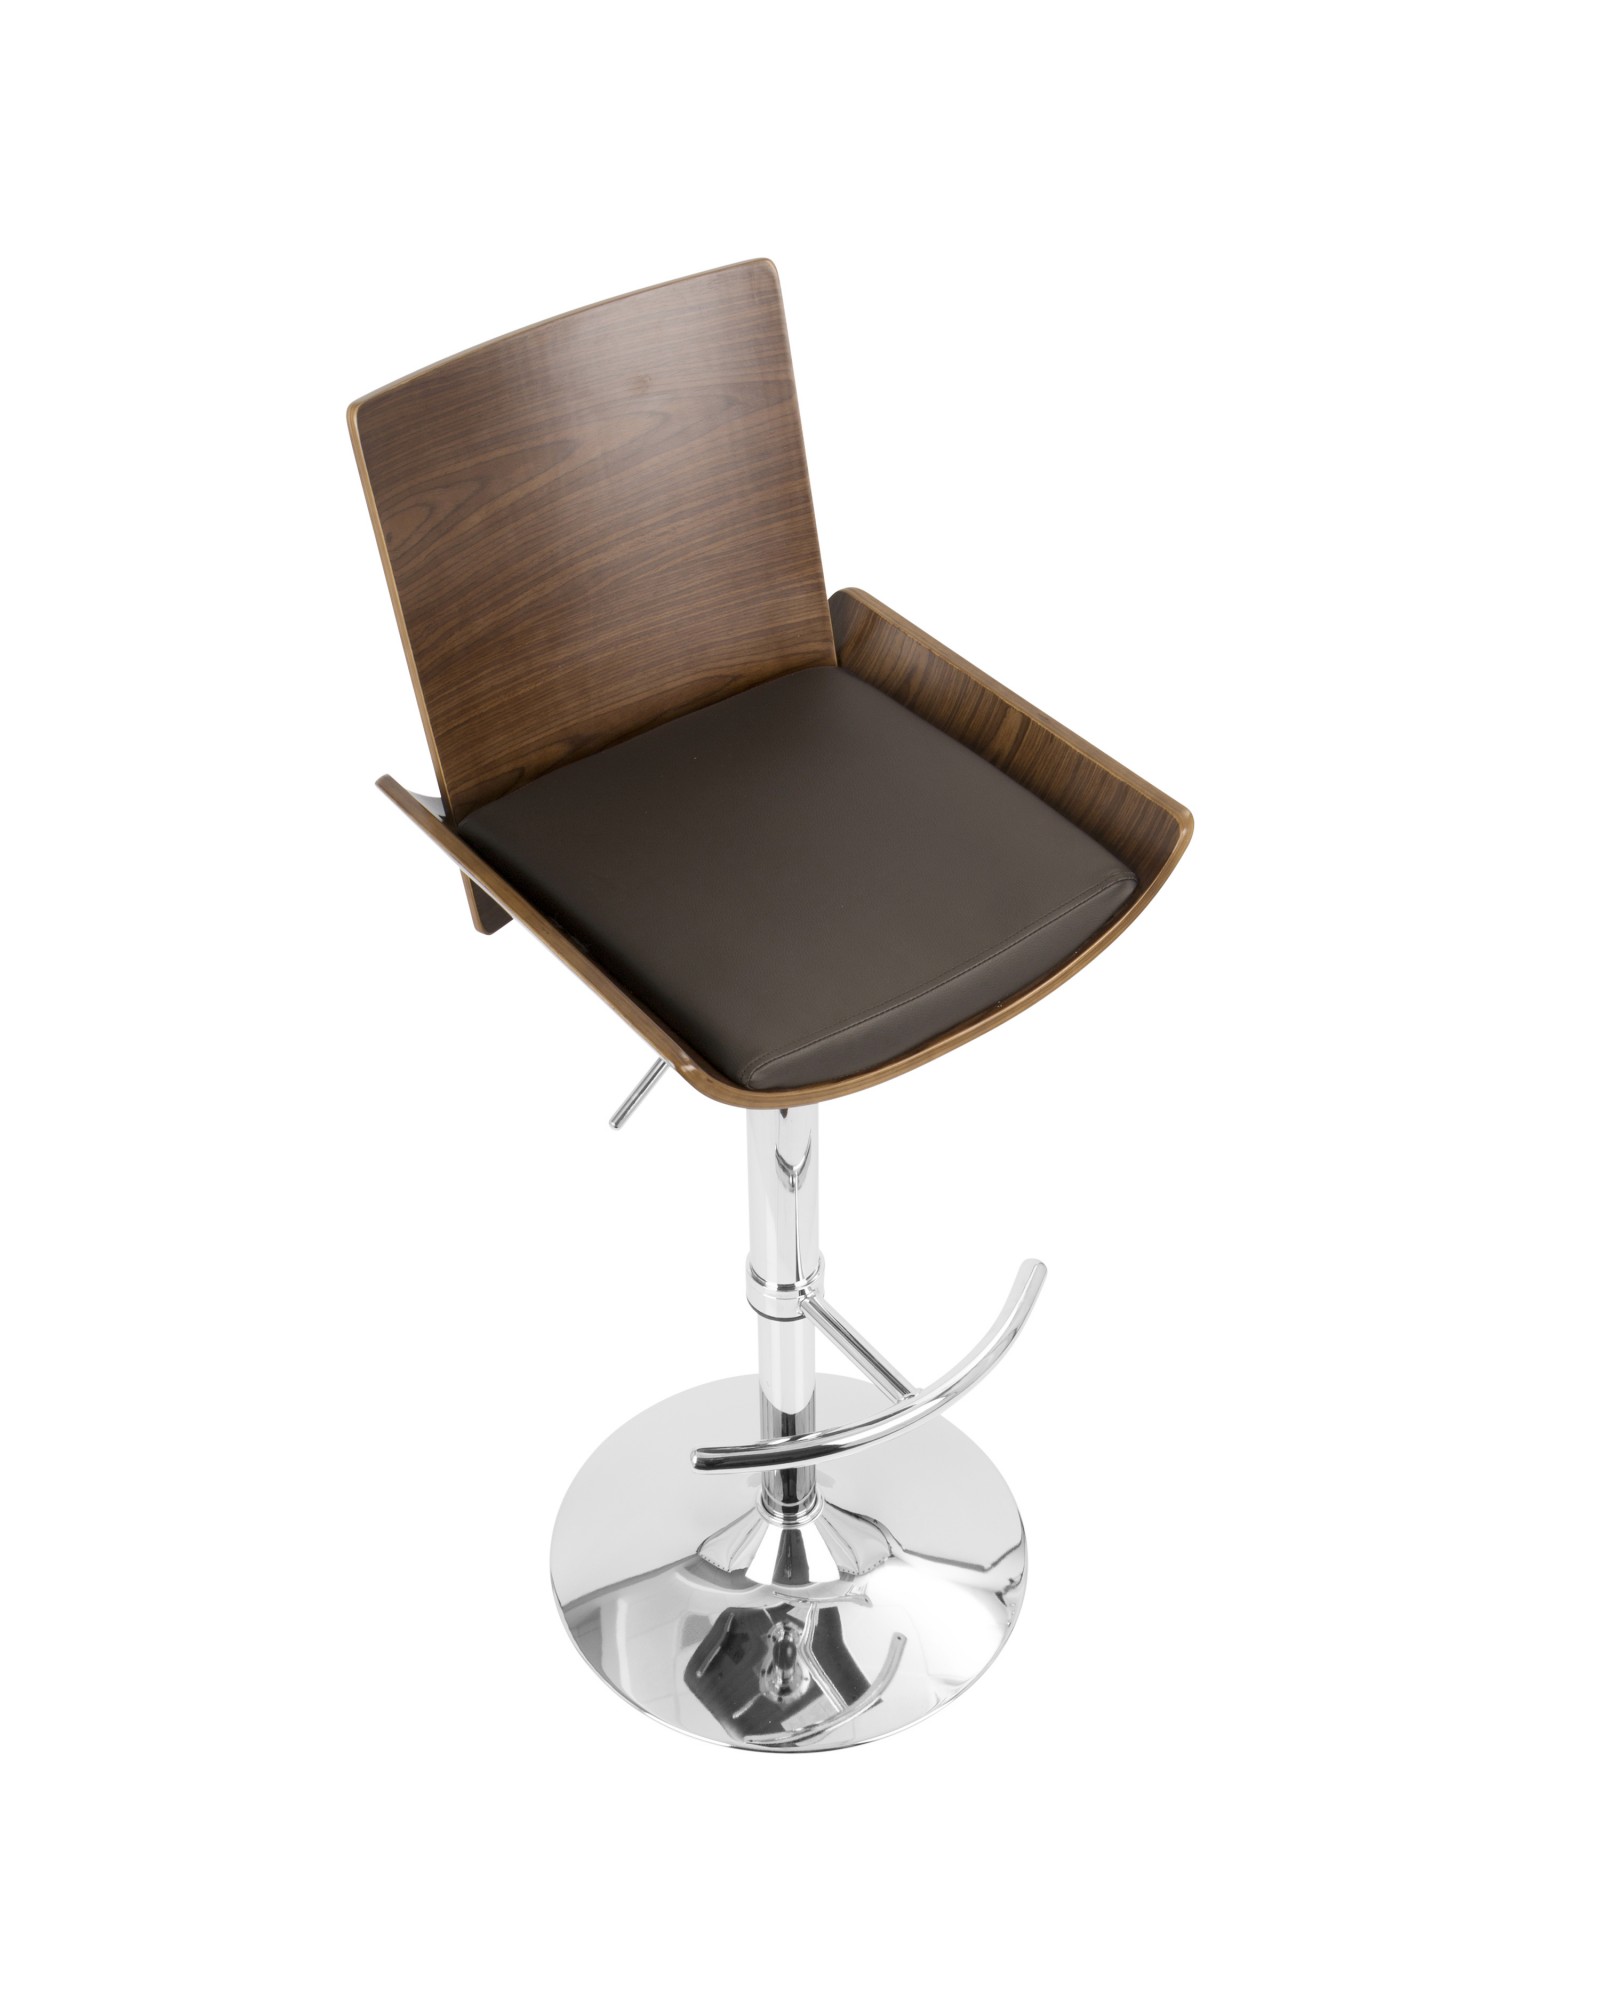 Vittorio Mid-Century Modern Adjustable Barstool with Swivel in Walnut and Brown Faux Leather